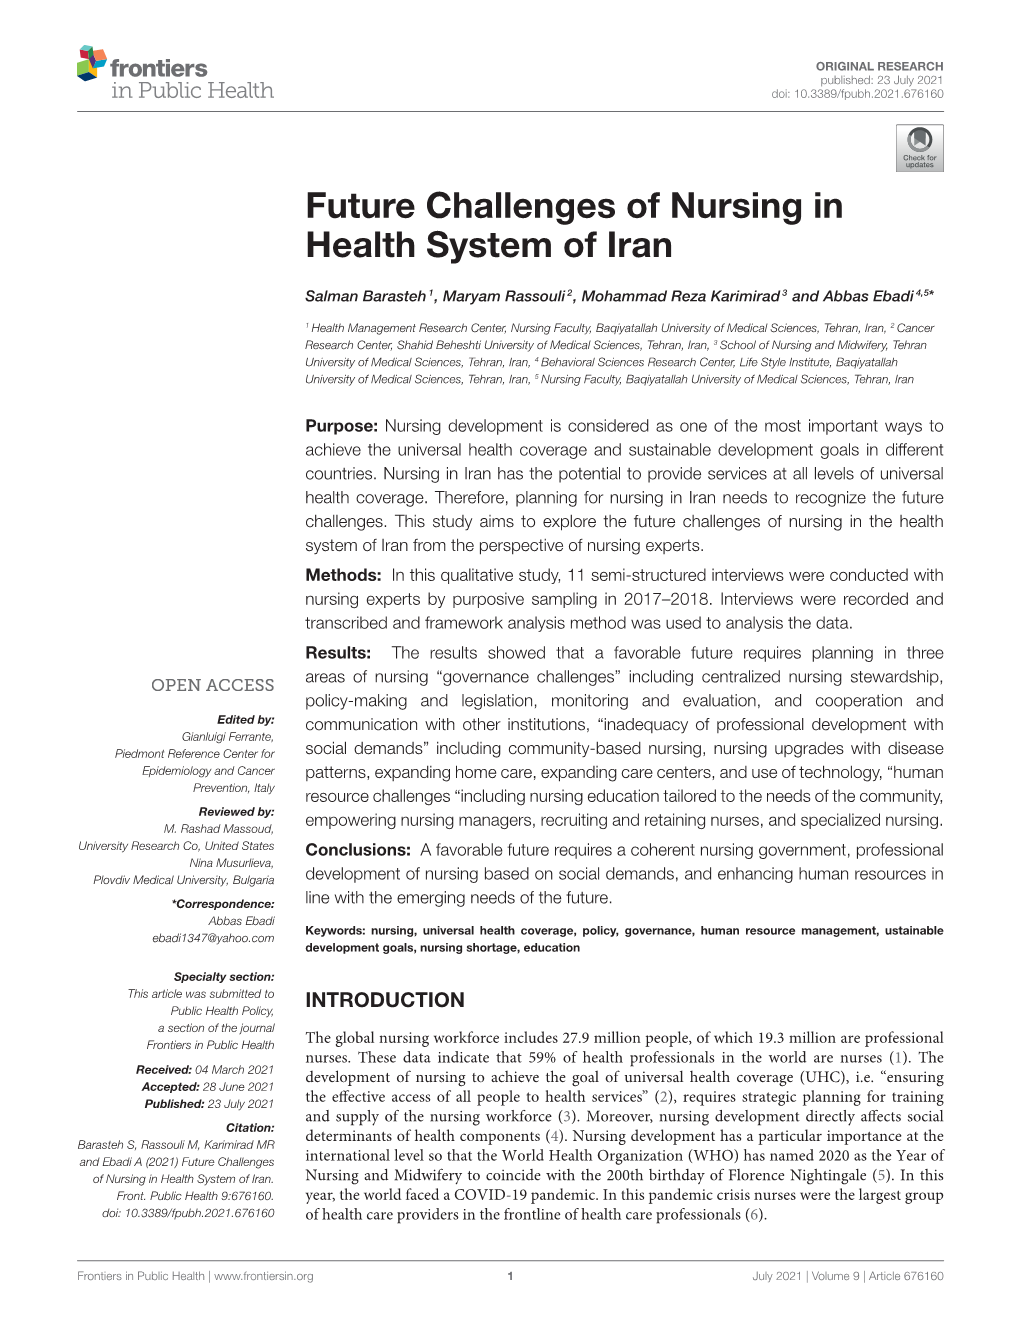 Future Challenges of Nursing in Health System of Iran